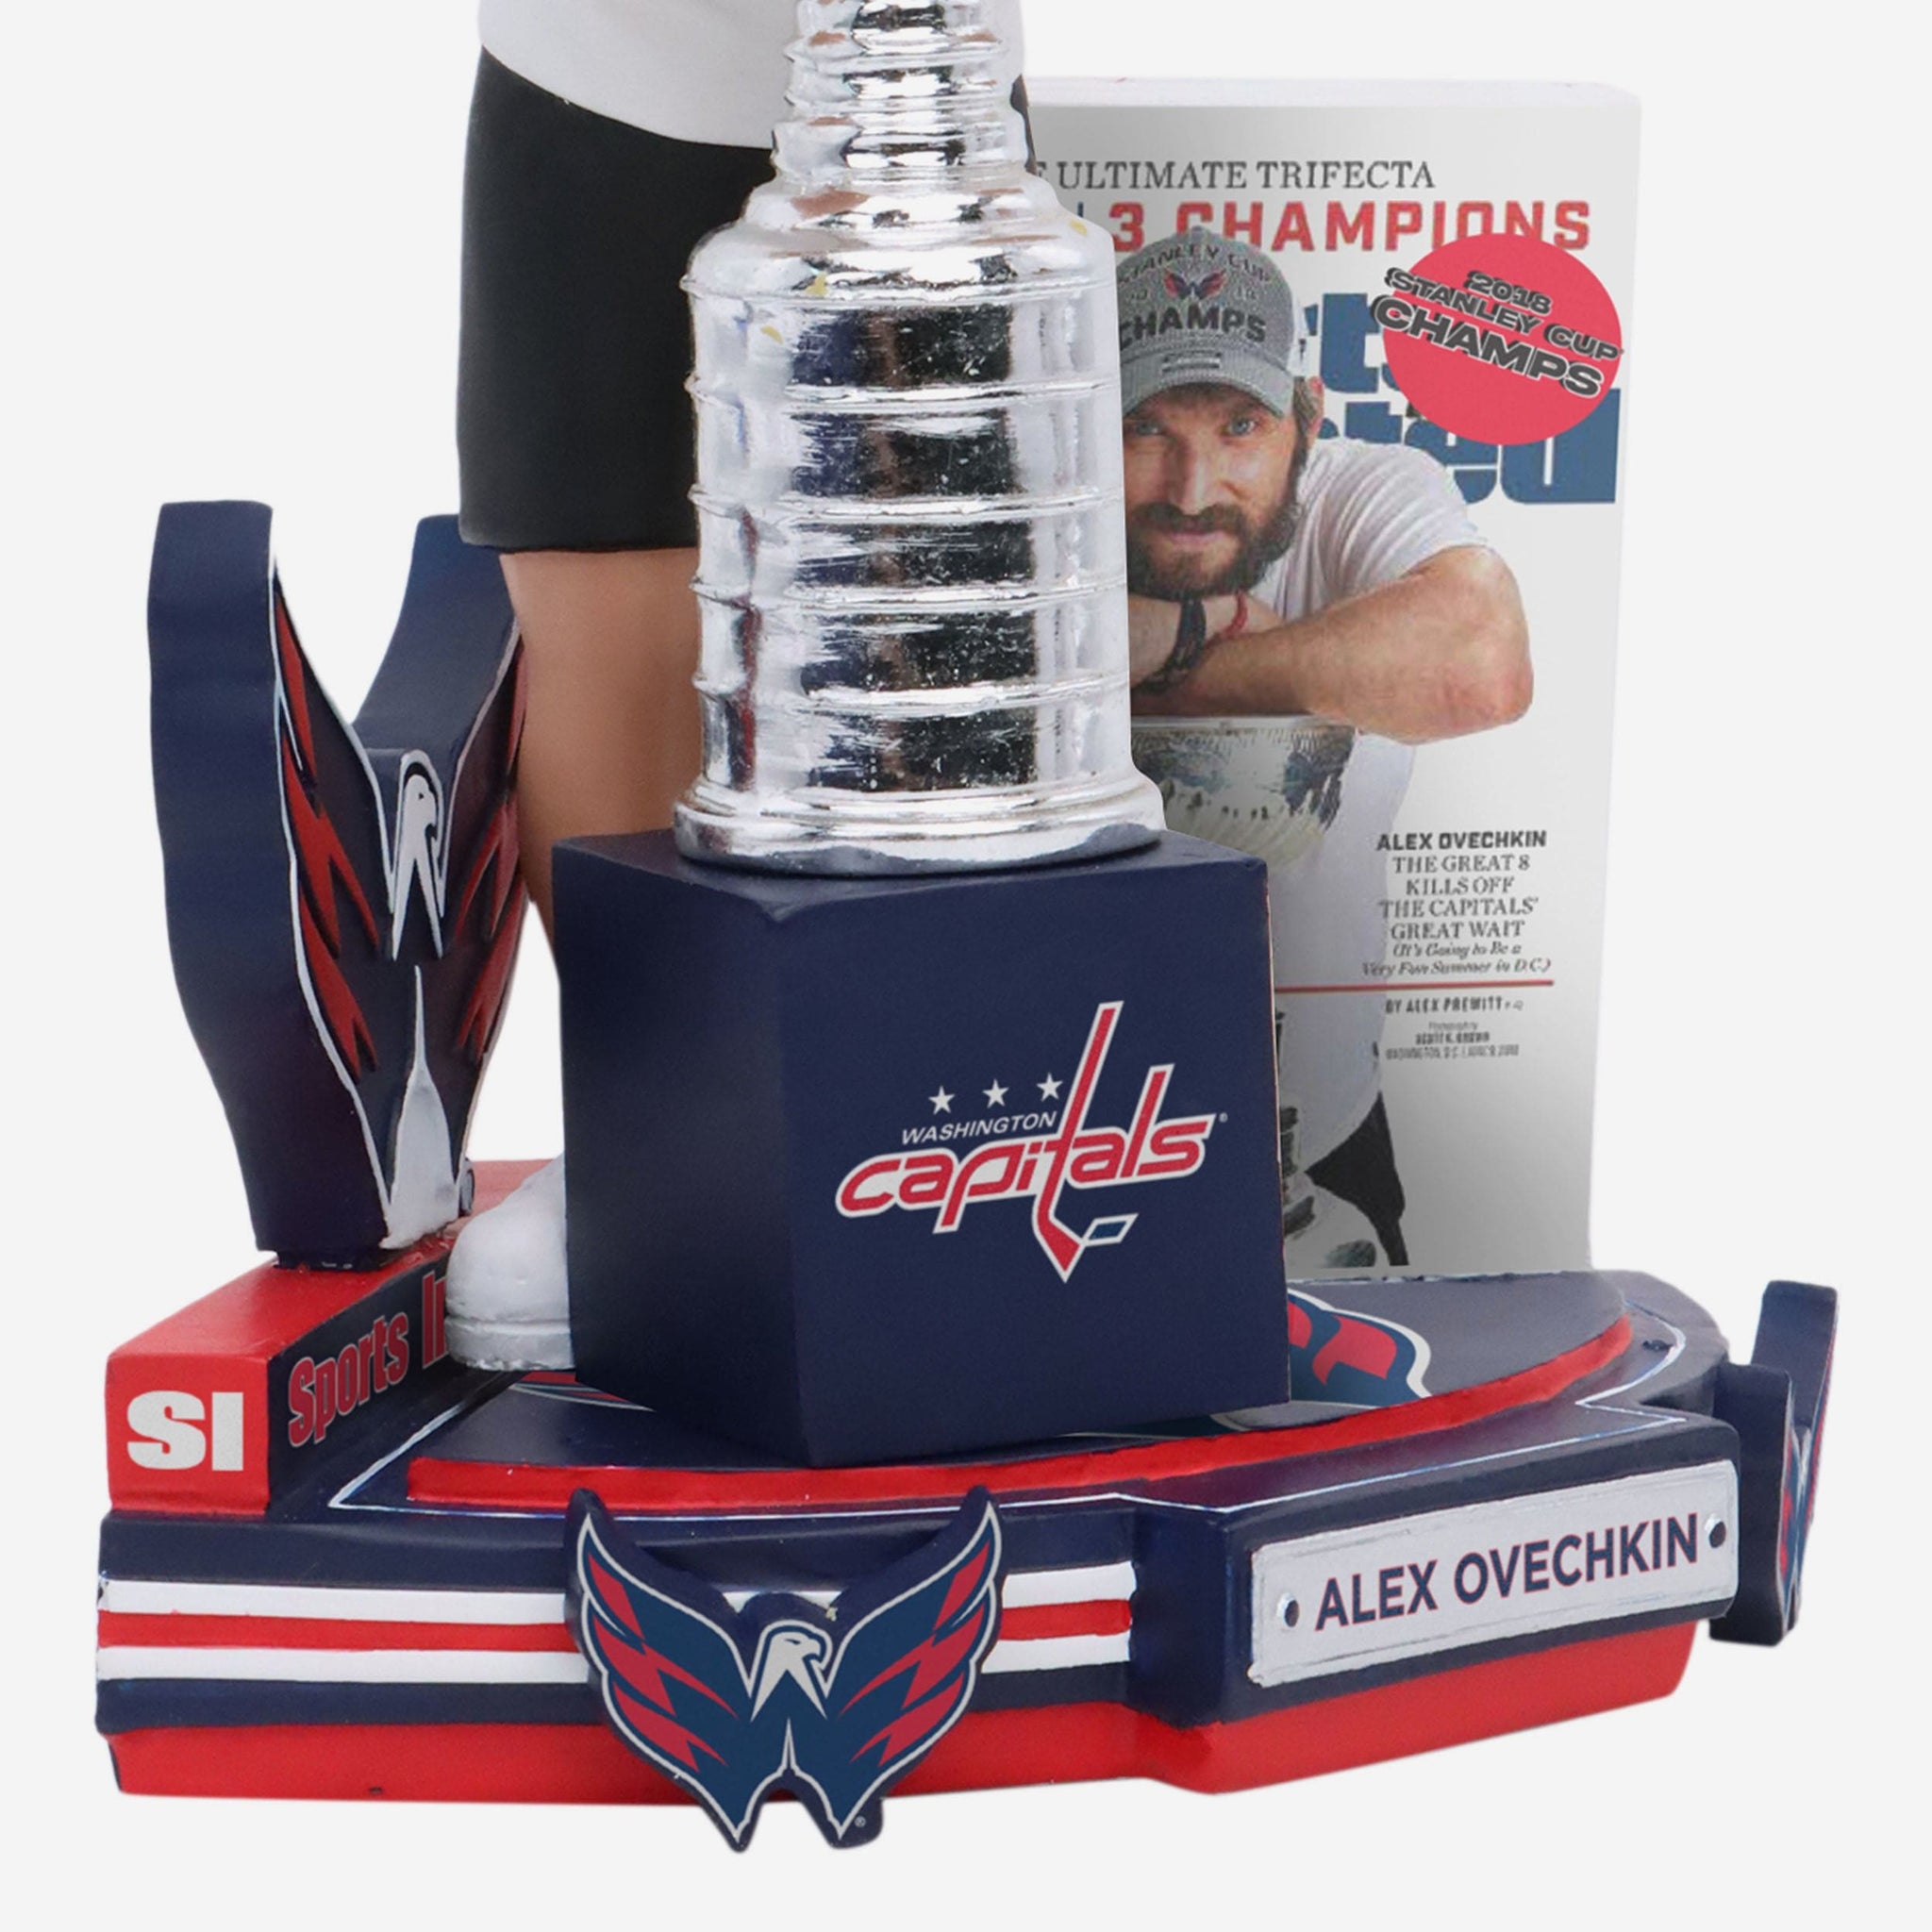 All Caps Washington Capitals, 2018 Nhl Stanley Cup Champions Sports  Illustrated Cover Framed Print by Sports Illustrated - Sports Illustrated  Covers